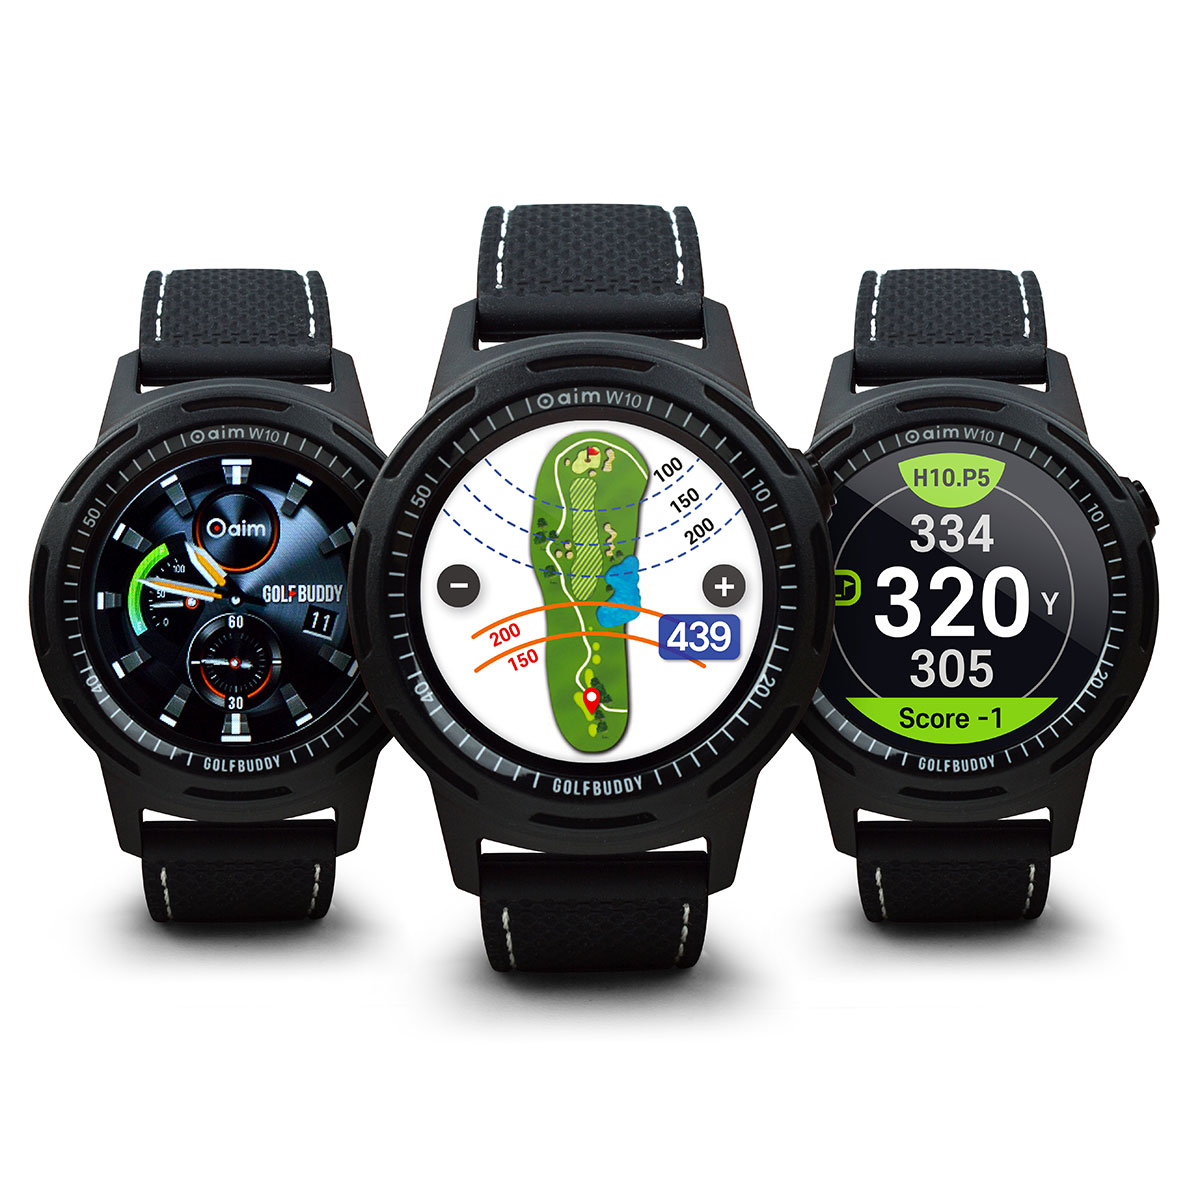 Get The Best Deal On GOLFBUDDY Aim W10 Golf Smartwatch For $149.99